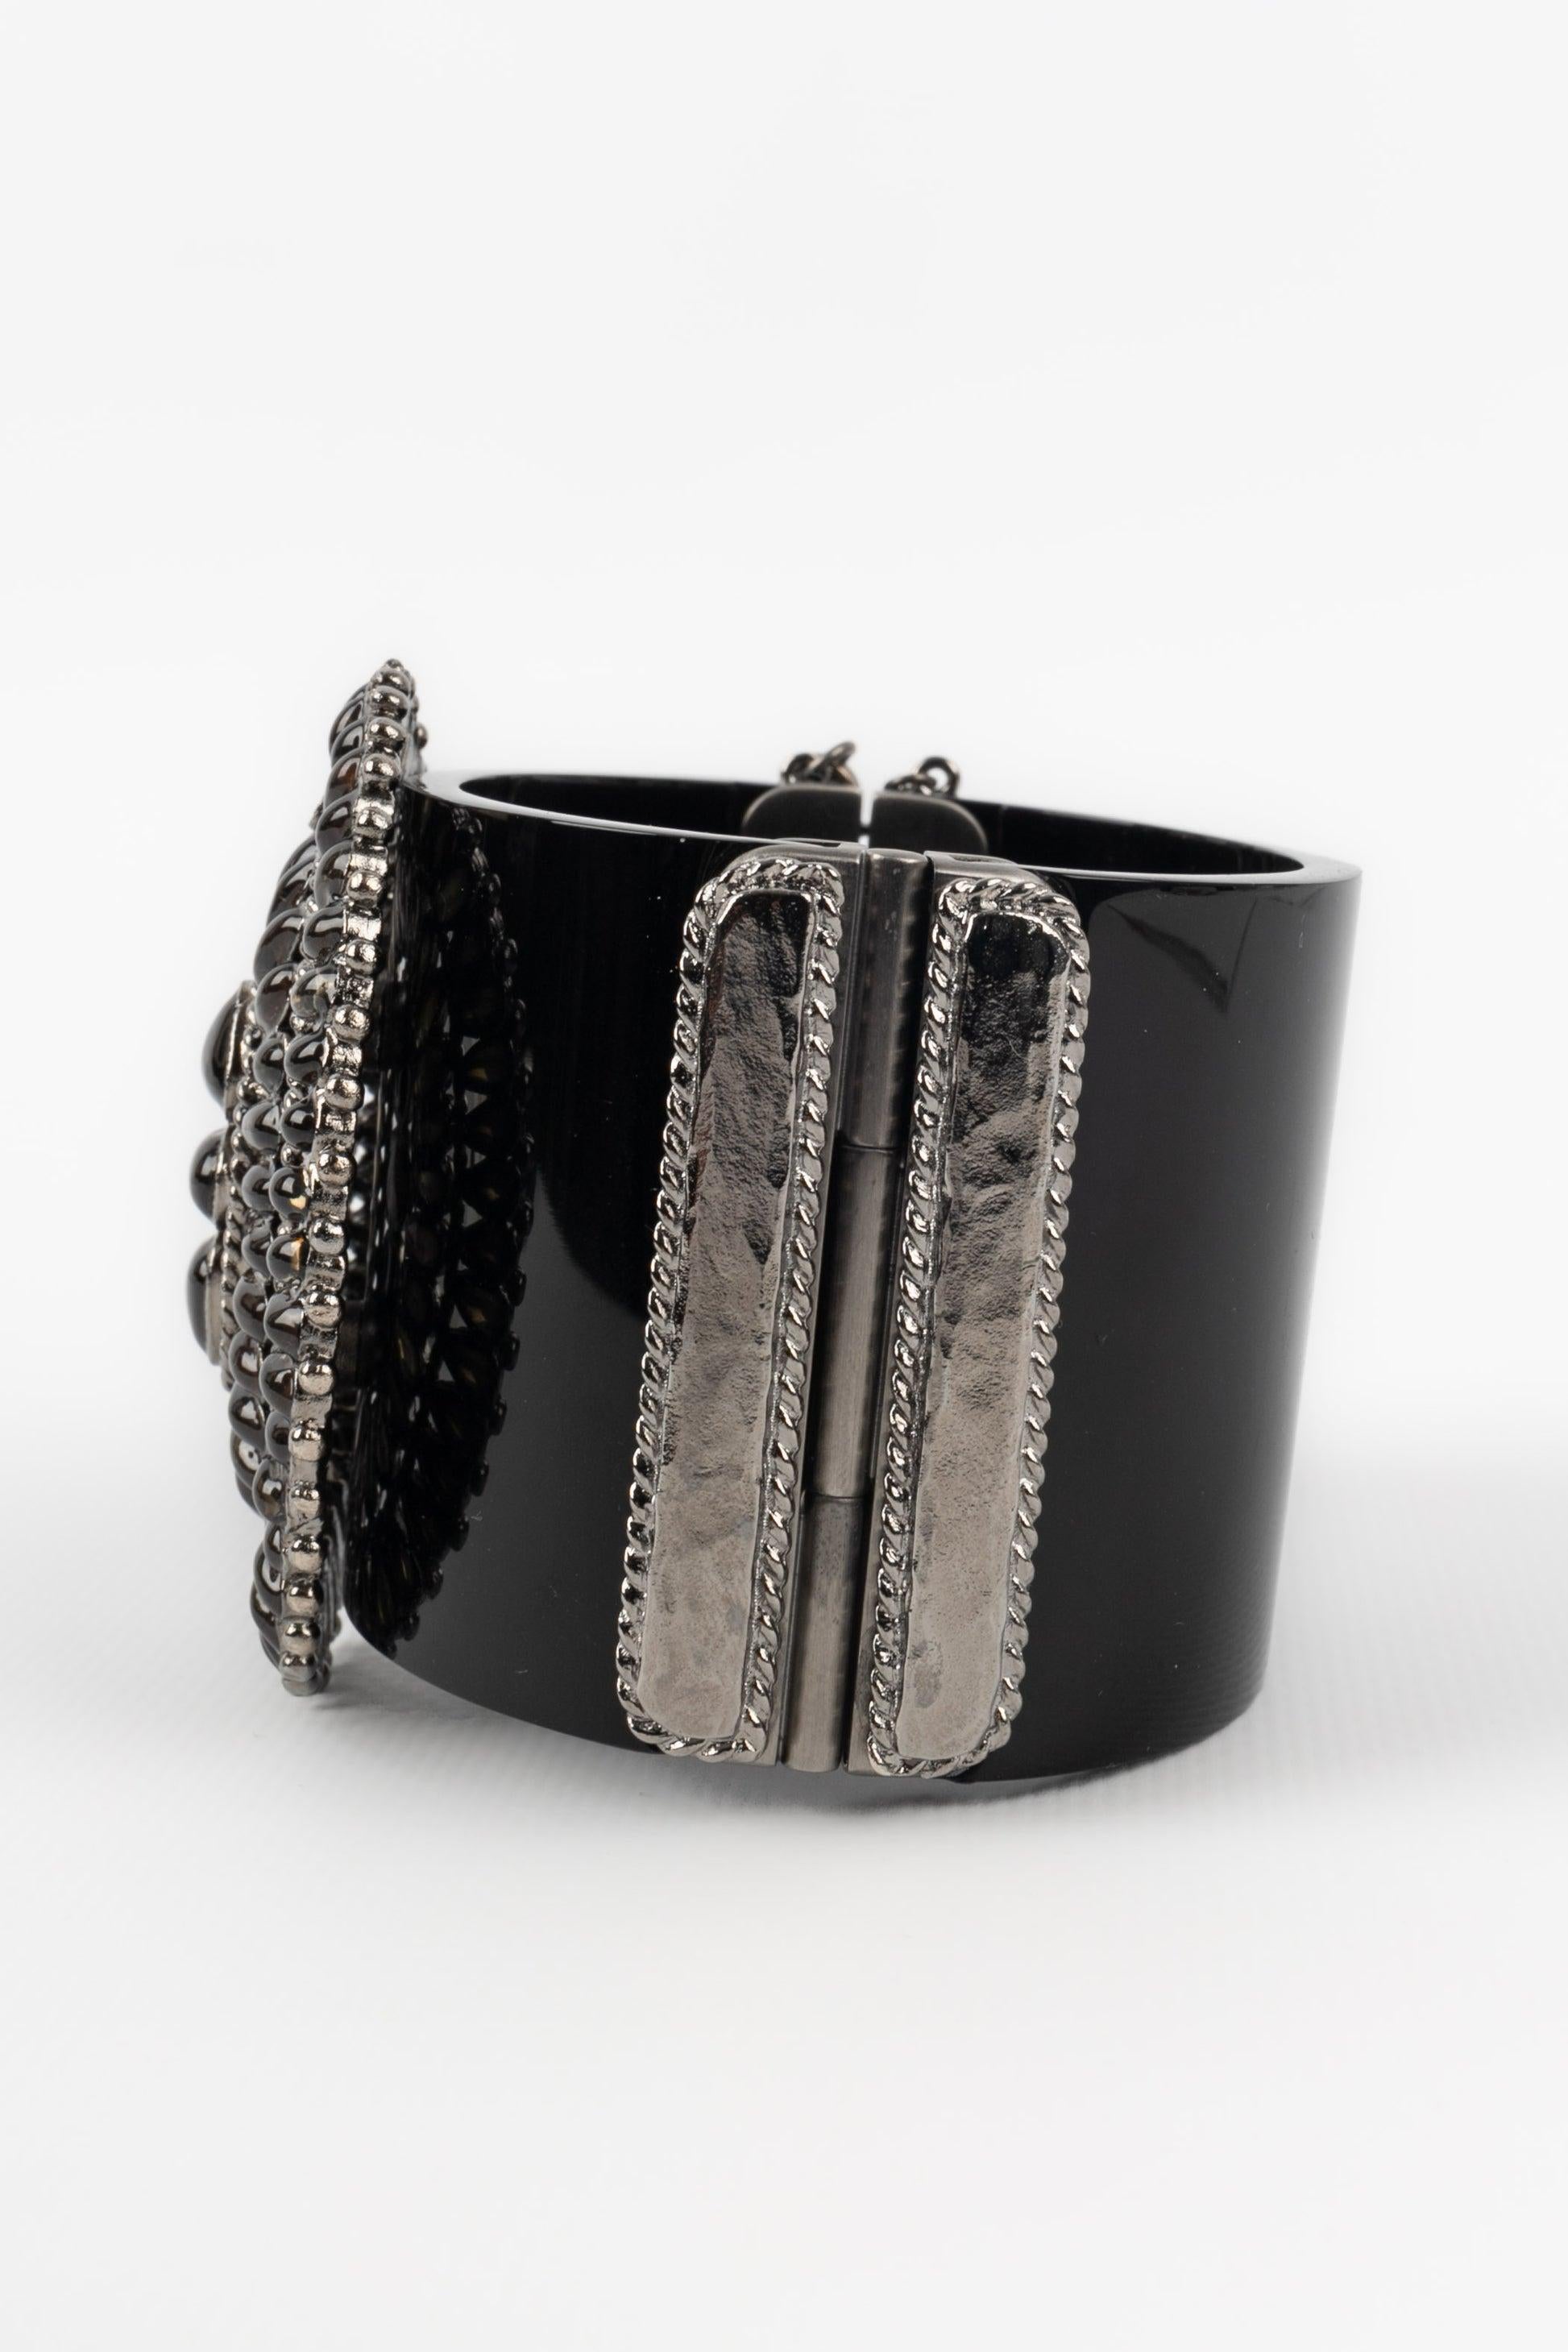 Chanel Cuff Bracelet in Black Bakelite, Silvery Metal, and Resin In Excellent Condition For Sale In SAINT-OUEN-SUR-SEINE, FR